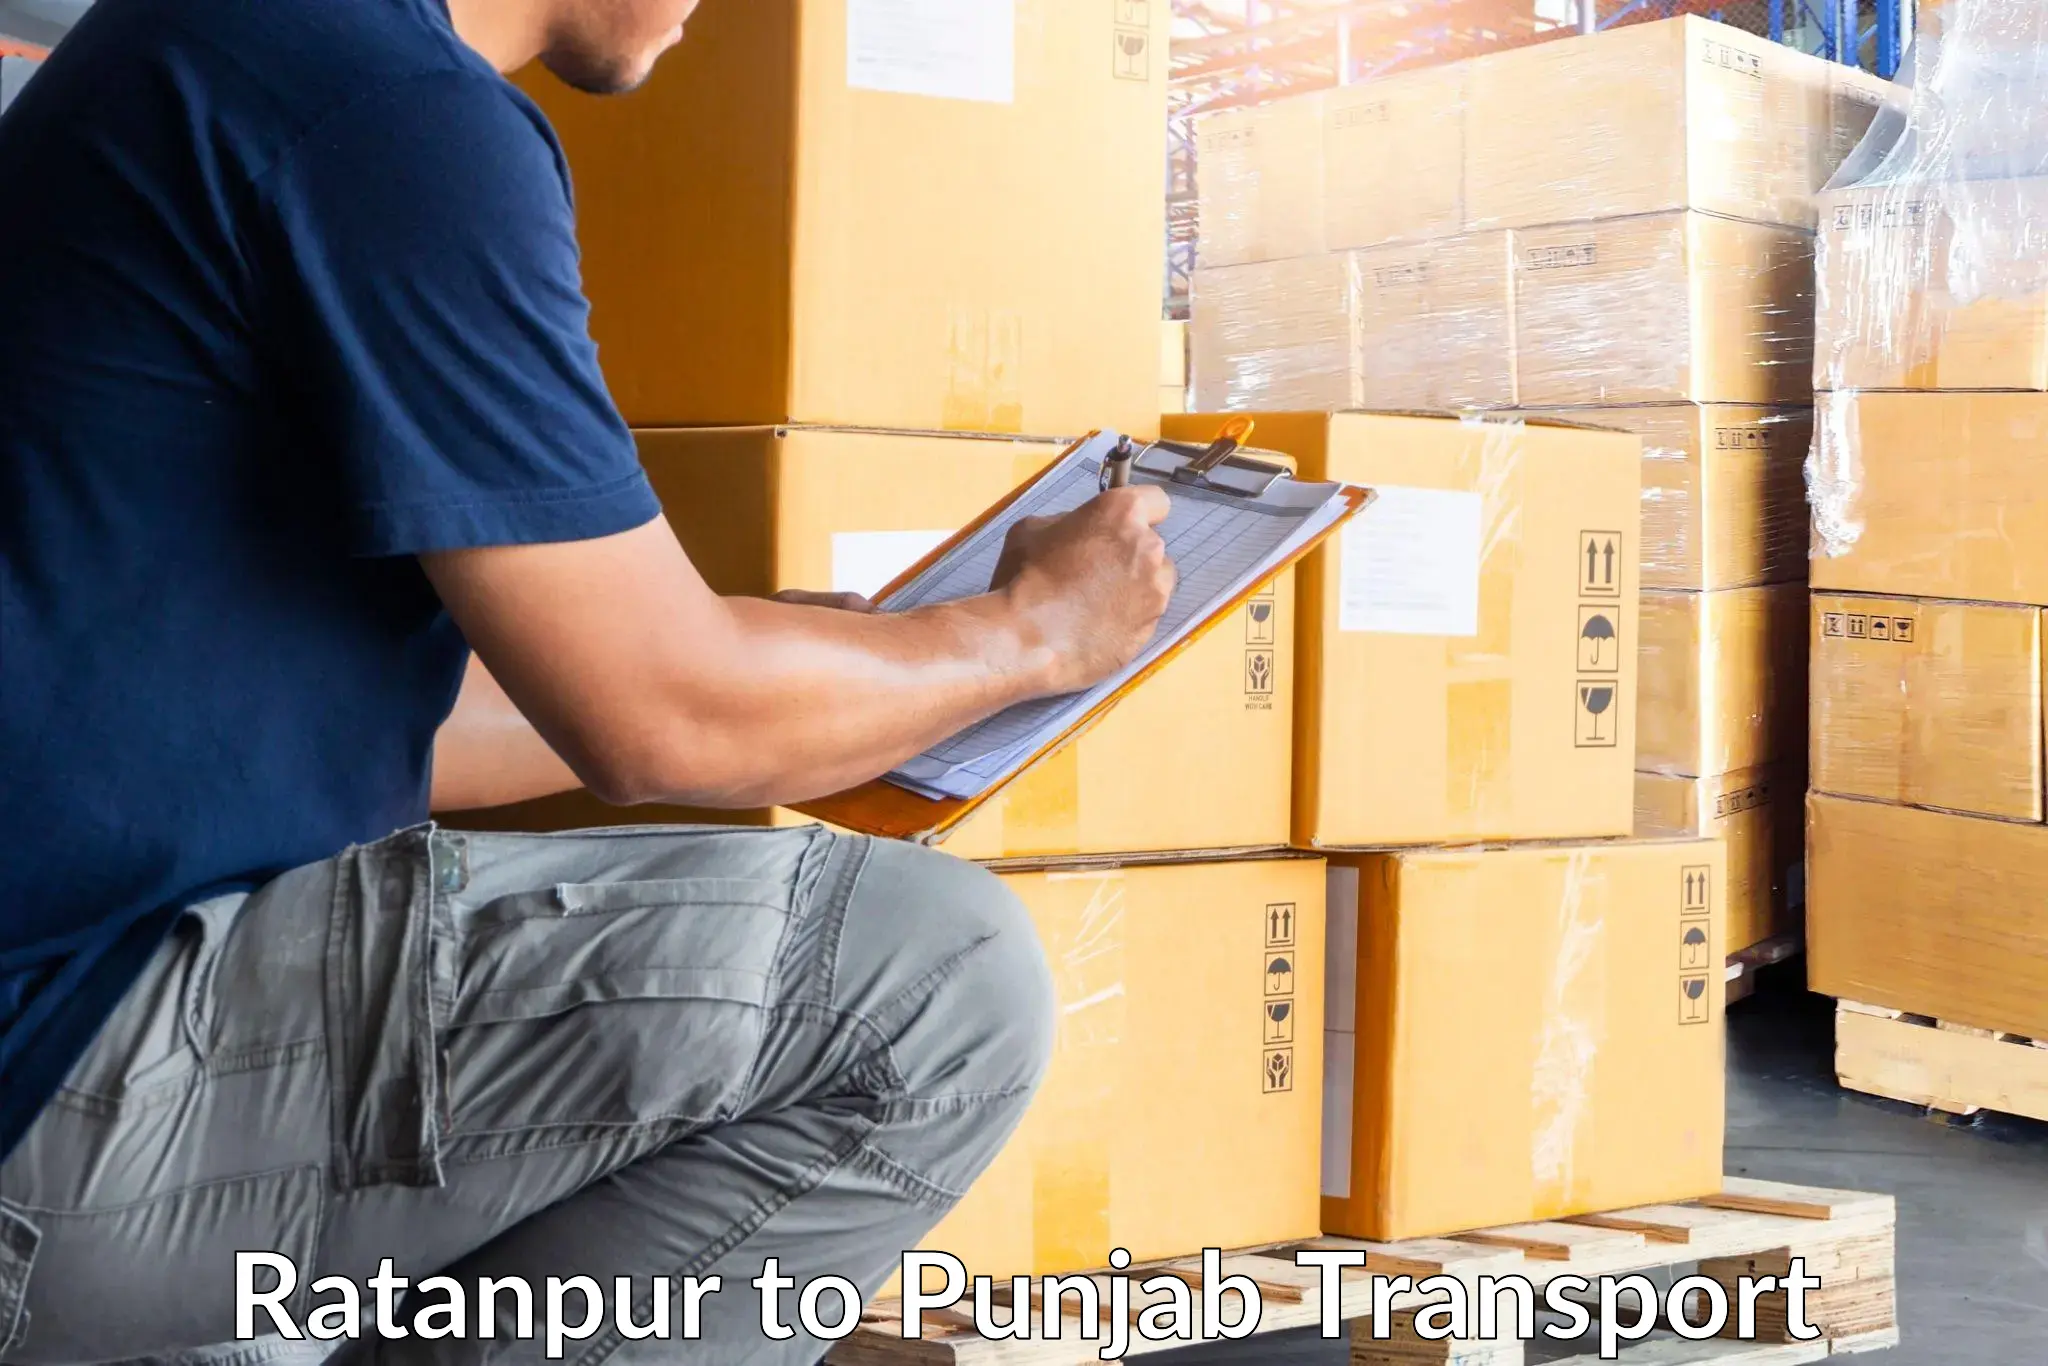 Part load transport service in India in Ratanpur to Kotkapura